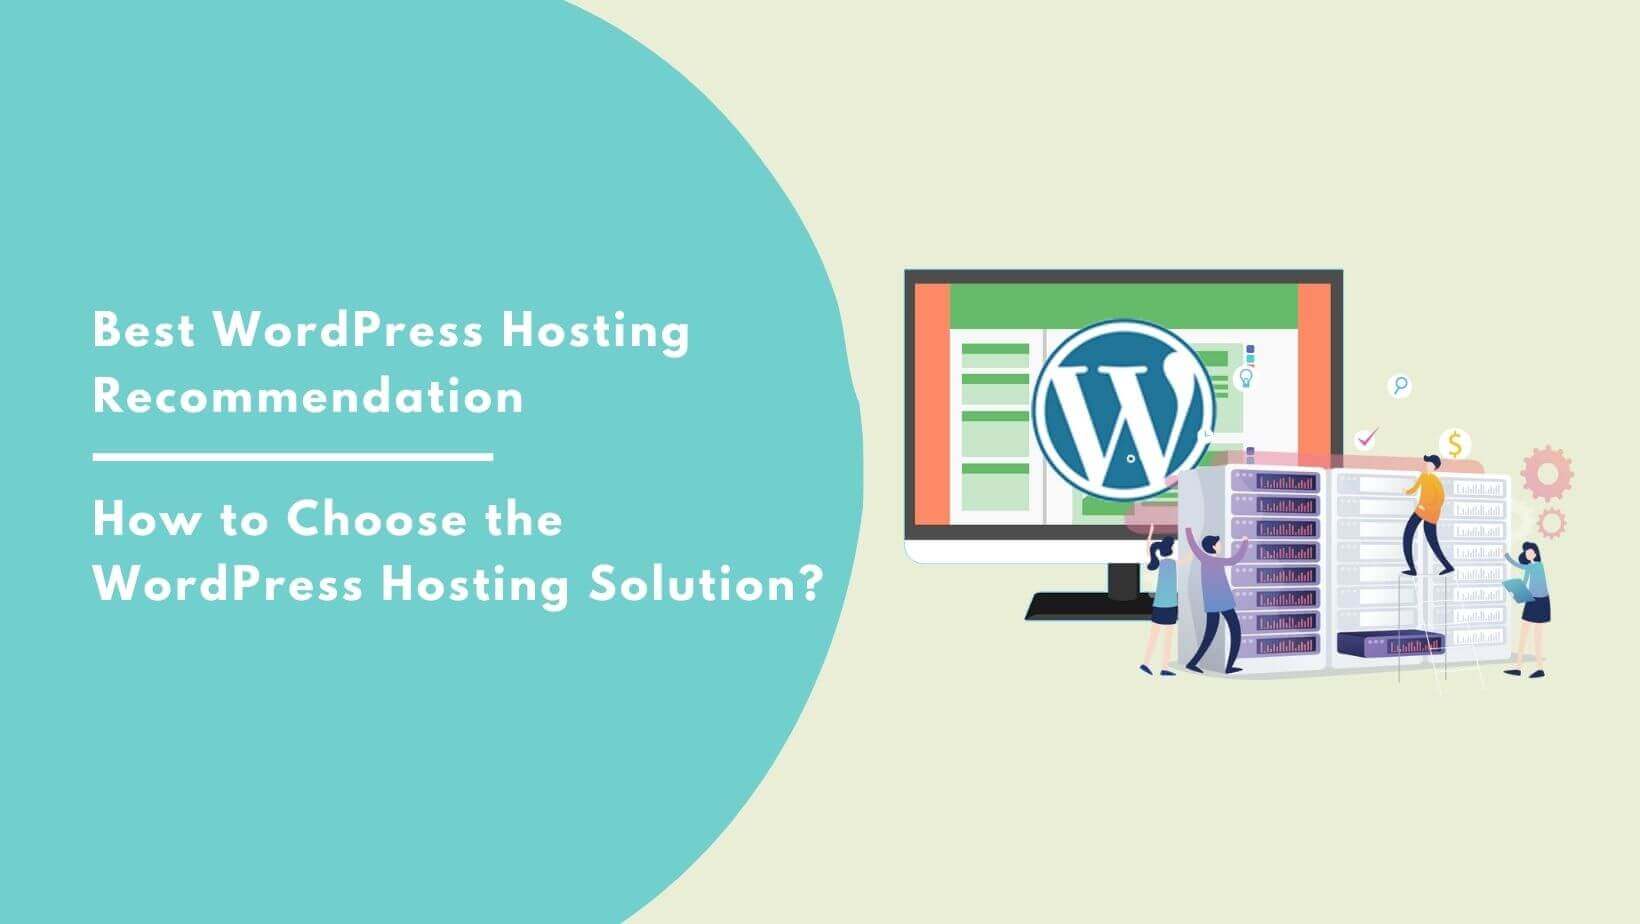 Best WordPress Hosting Recommendation How to Choose the WordPress Hosting Solution